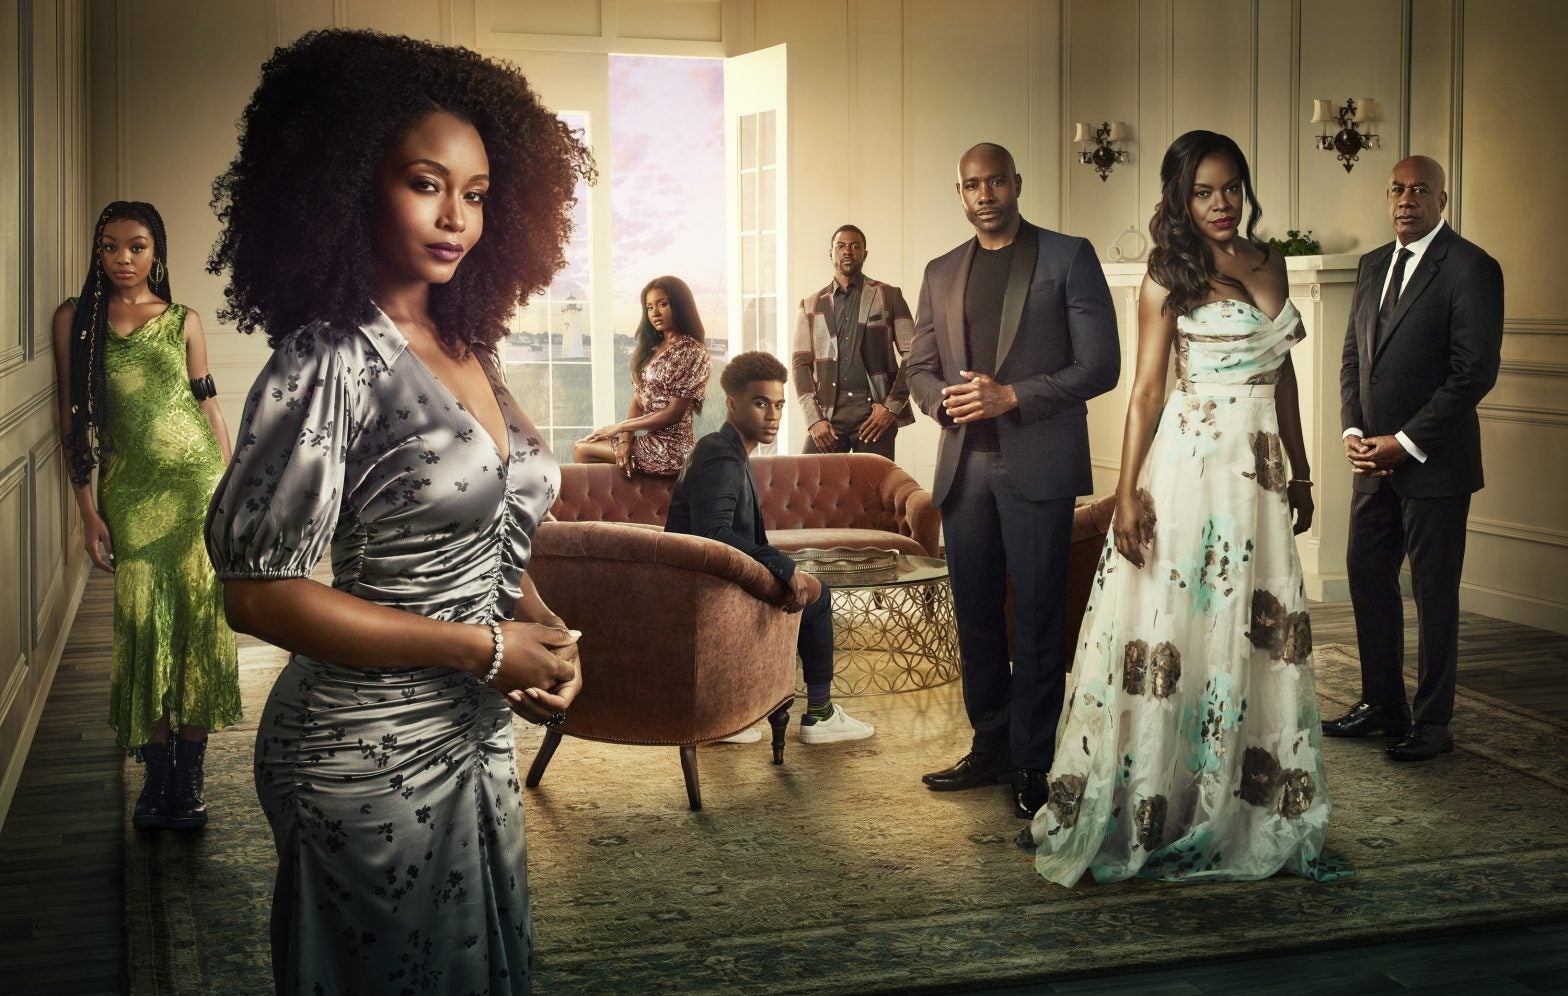 Exclusive: Get Your First Look At The Black Opulence In 'Our Kind Of People'